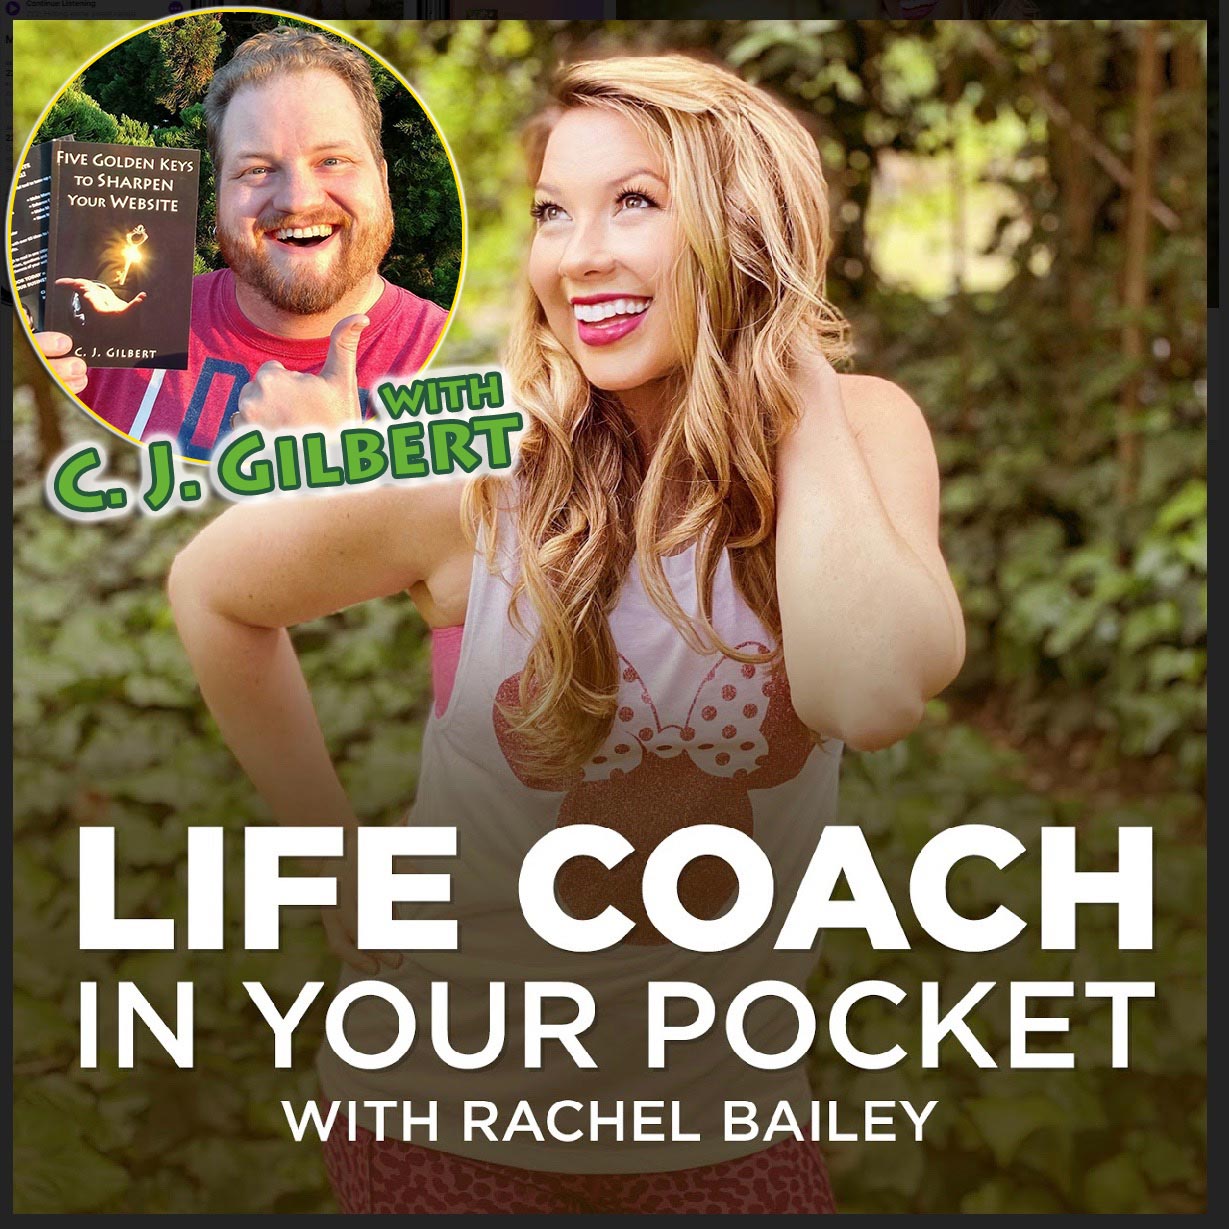 Life Coach in Your Pocket with Rachel Bailey